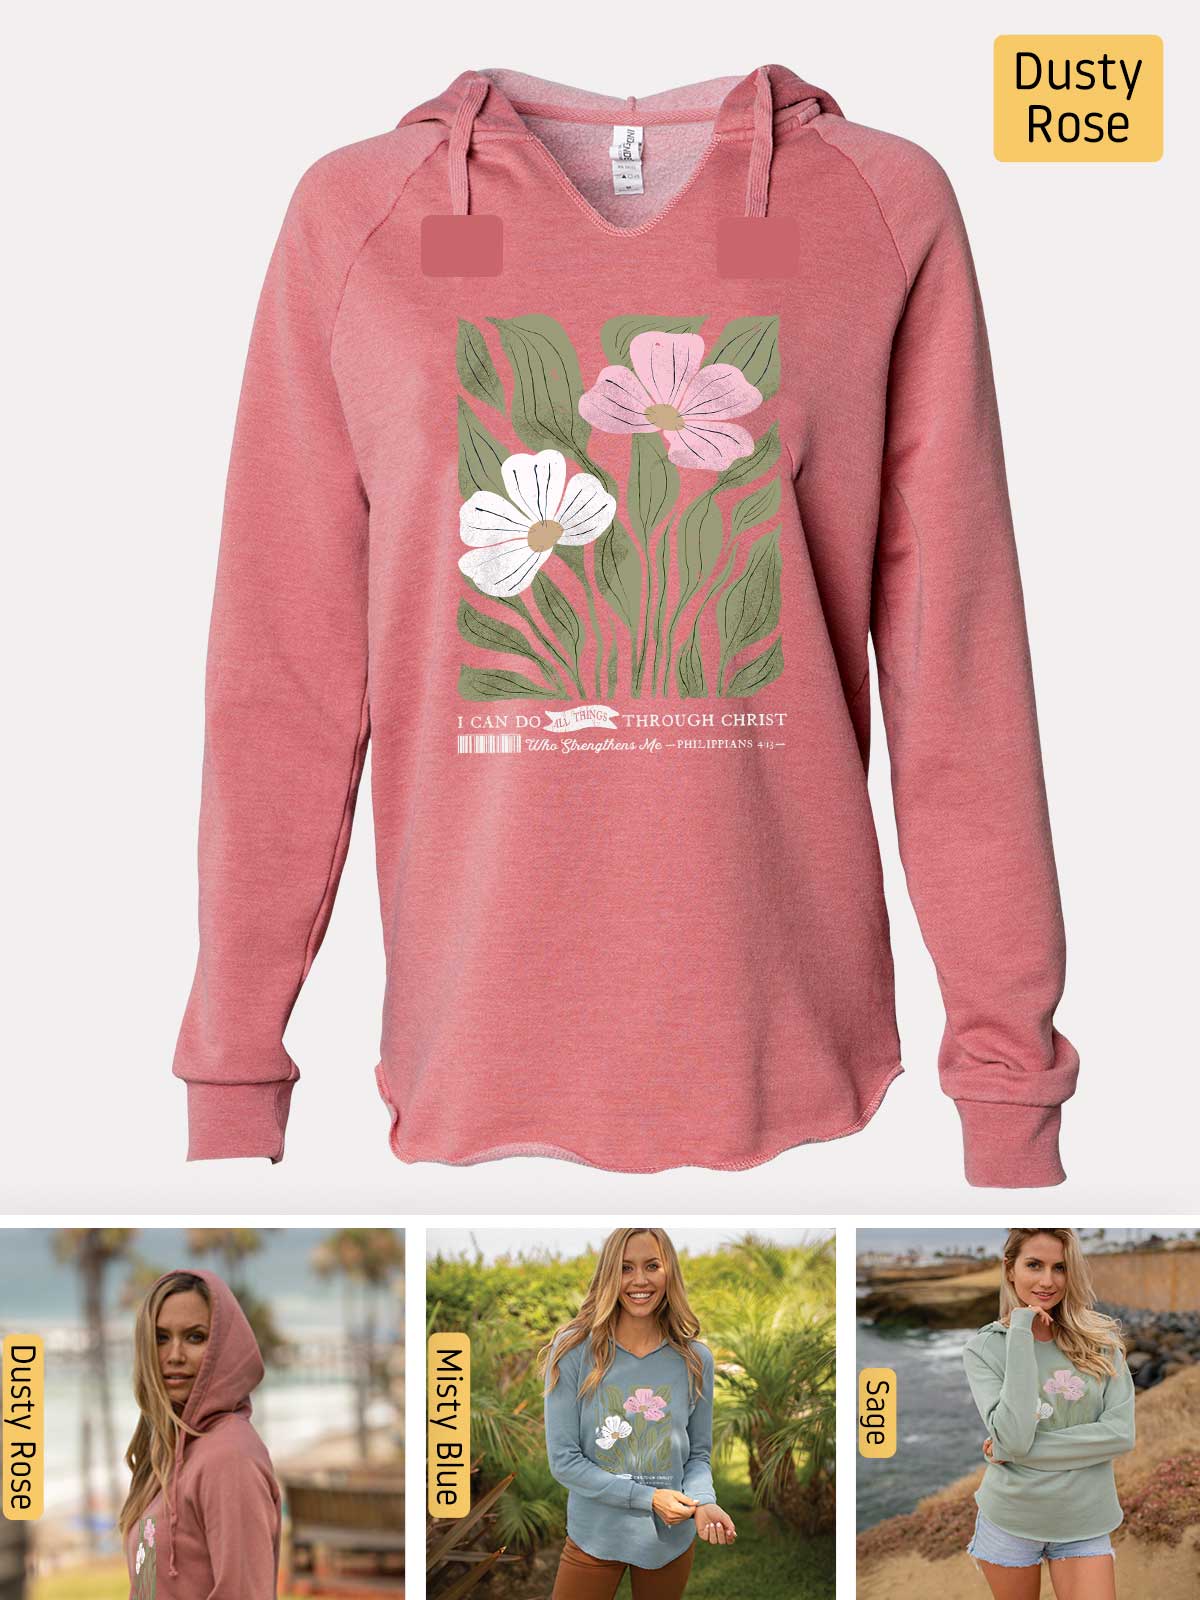 a woman wearing a pink sweatshirt with flowers on it